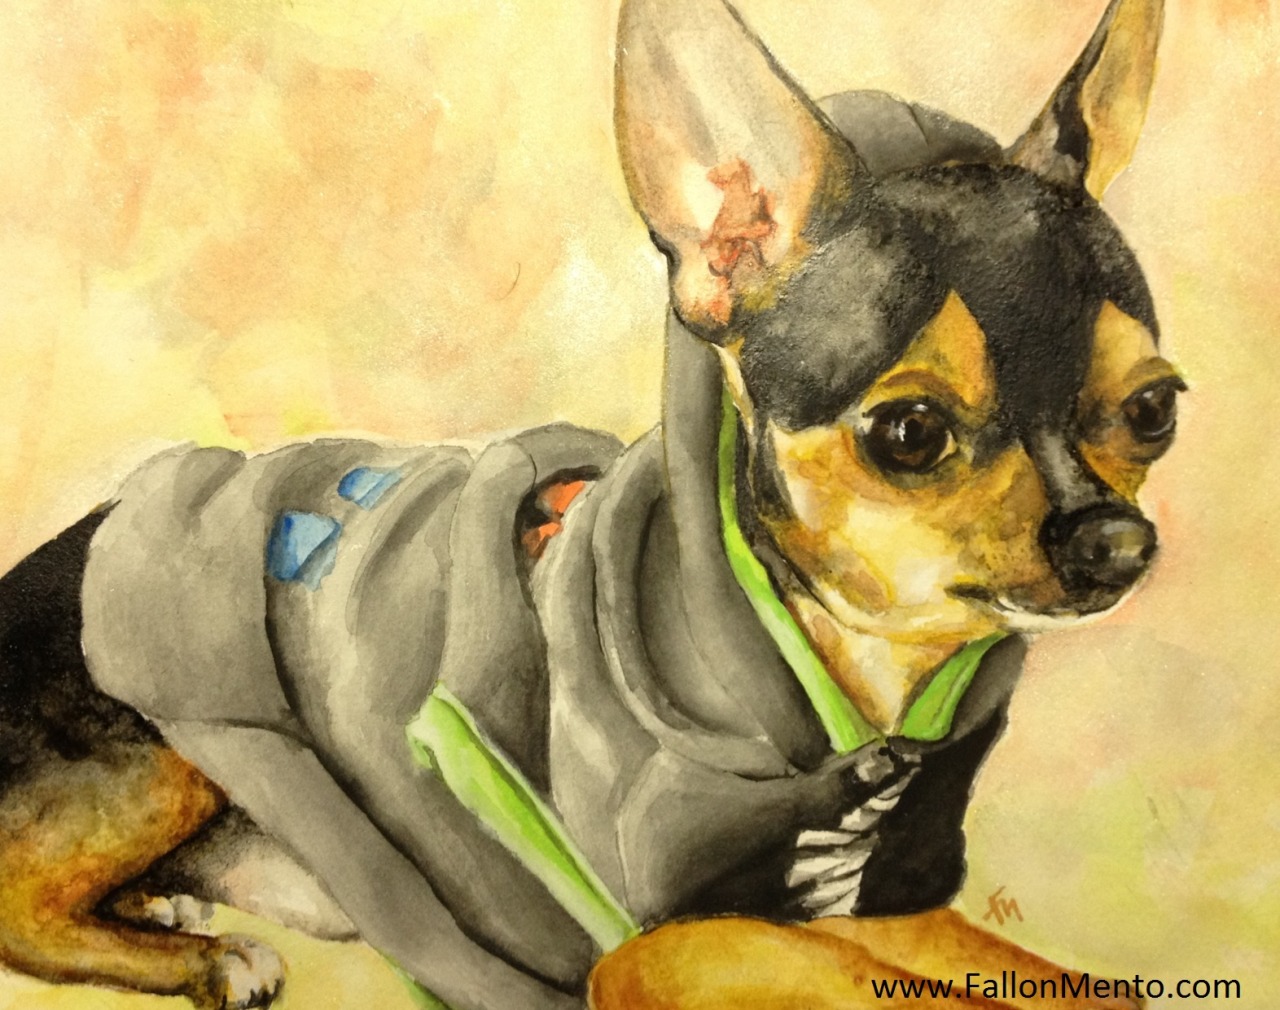 11in by 14in water color of a black and tan chihuahua that I was asked to paint. I enjoyed working on this one. I worked an iridescent medium on the background, so it&#8217;ll lightly shimmer when light hits it. You can see it near the ear in the foreground. Yes, that is a hoodie. My online sketchbook: http://fallonmento.tumblr.com/